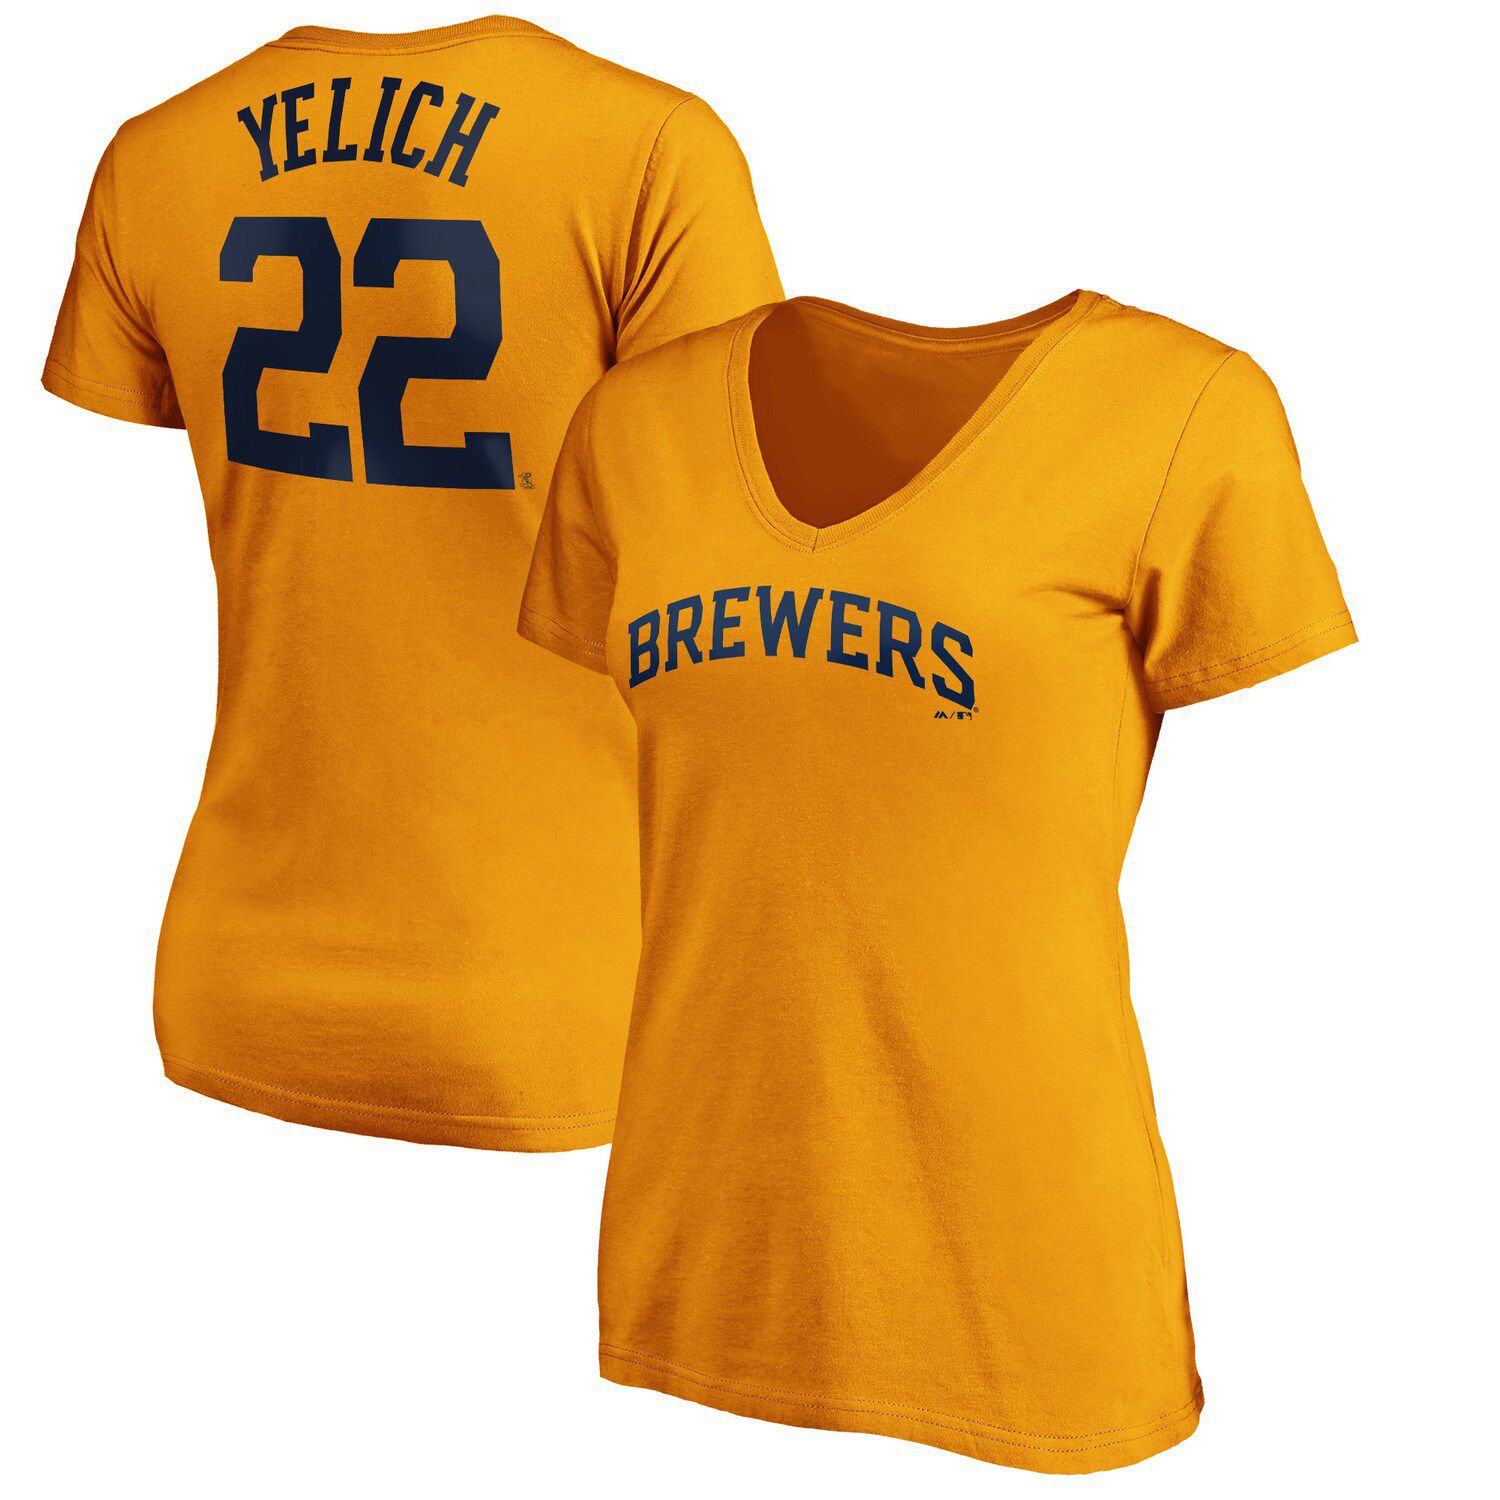 brewers shirts womens